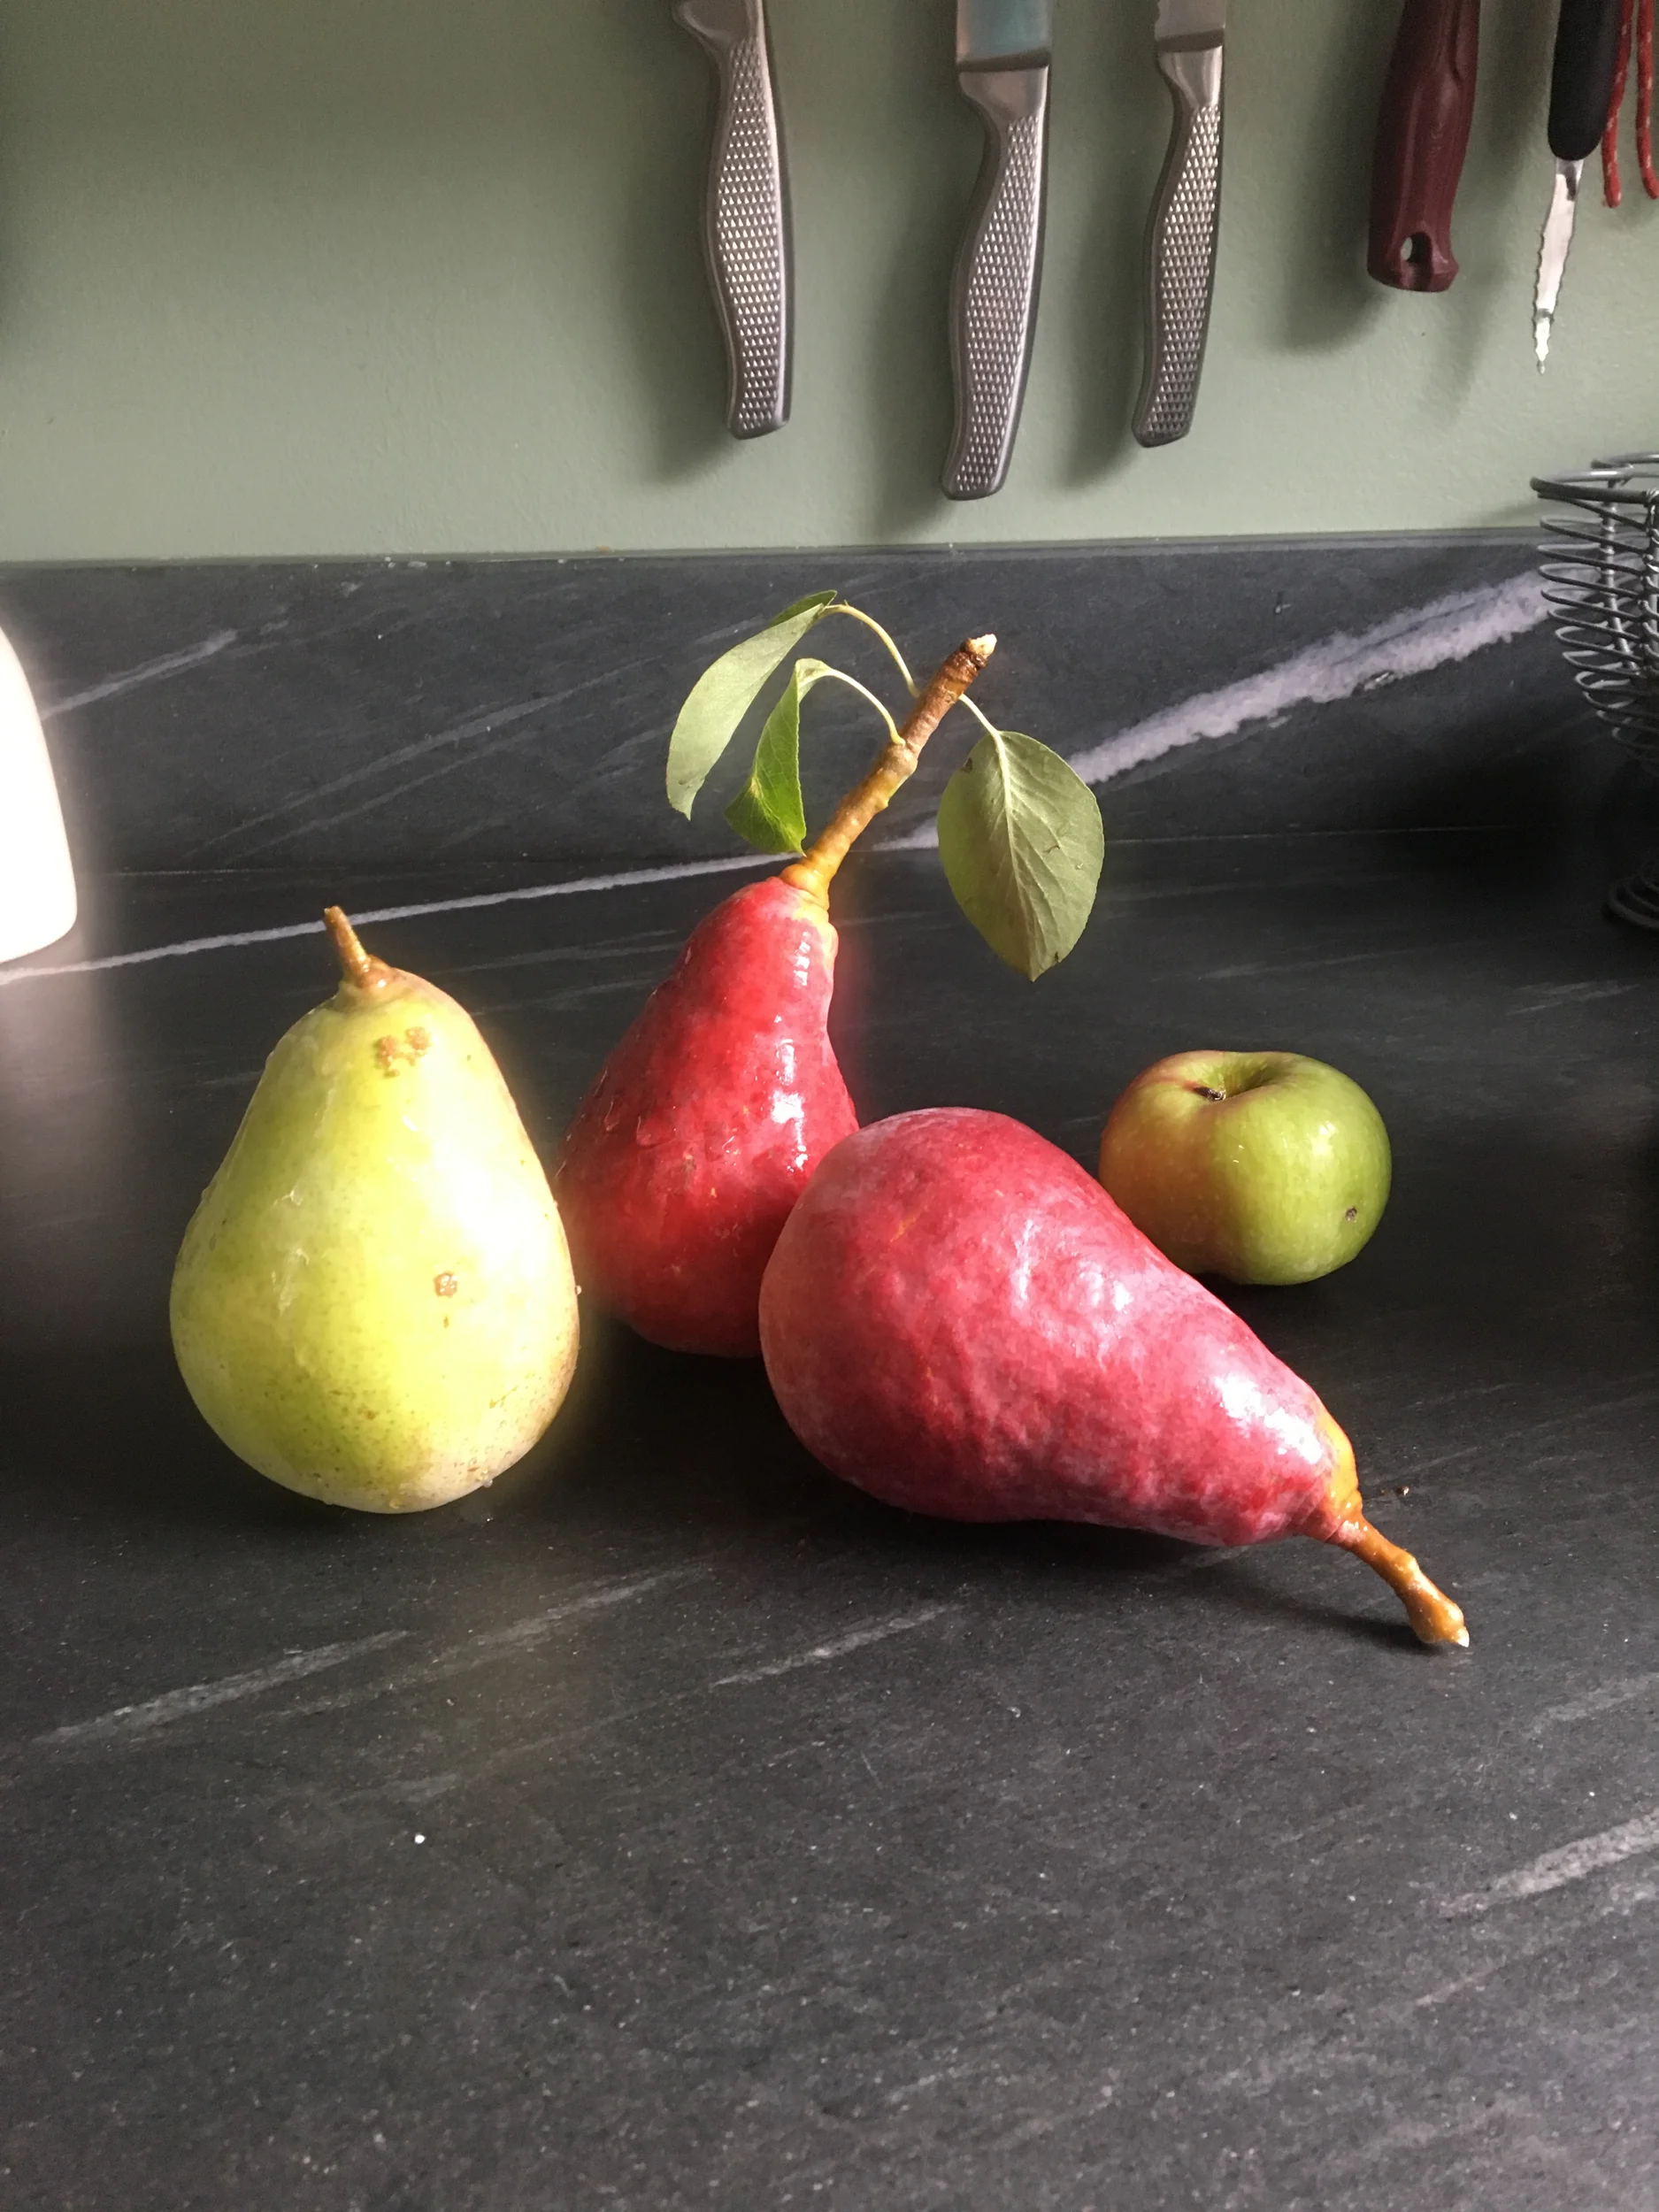 Pears on counter